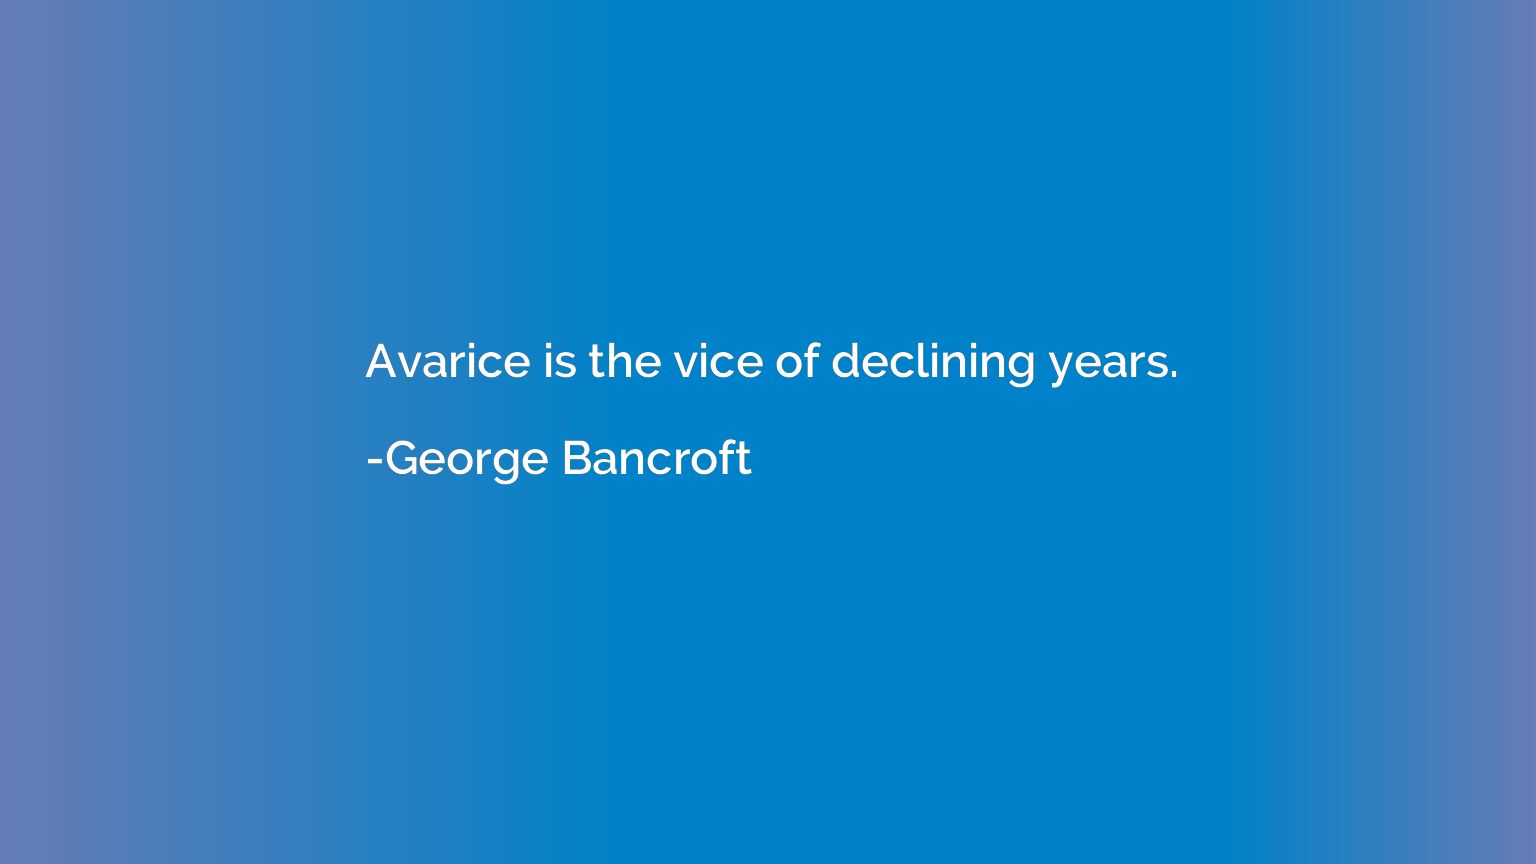 Avarice is the vice of declining years.